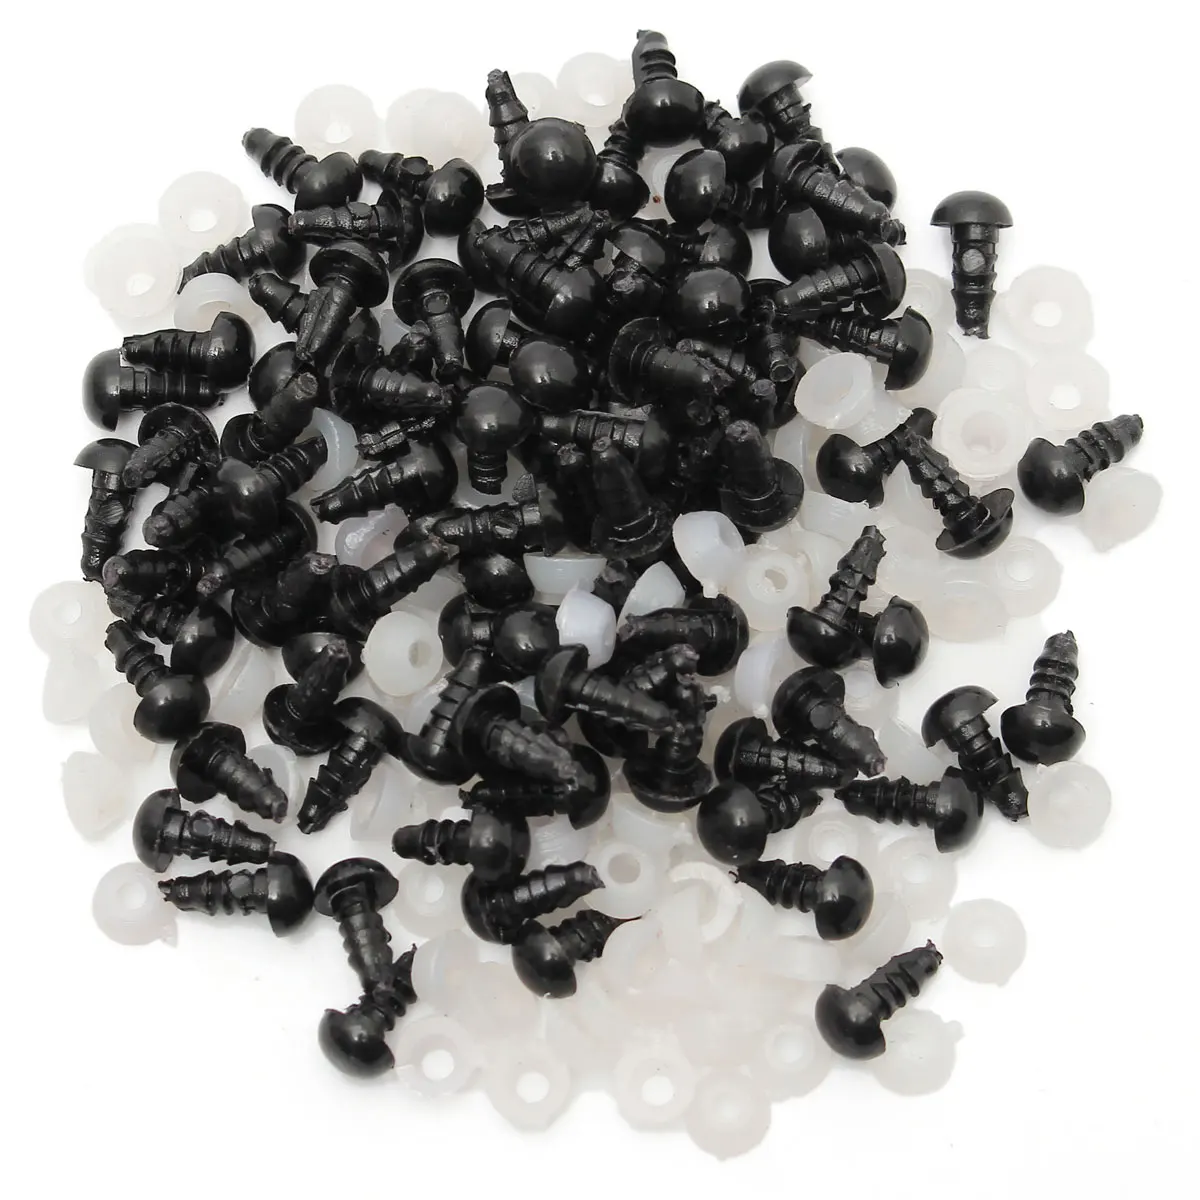 

Handmade Craft DIY 100pcs/50pairs 7mm Black Plastic Safety Eyes Washers for Teddy Bear Stuffed Toy Snap Animal Puppet Doll